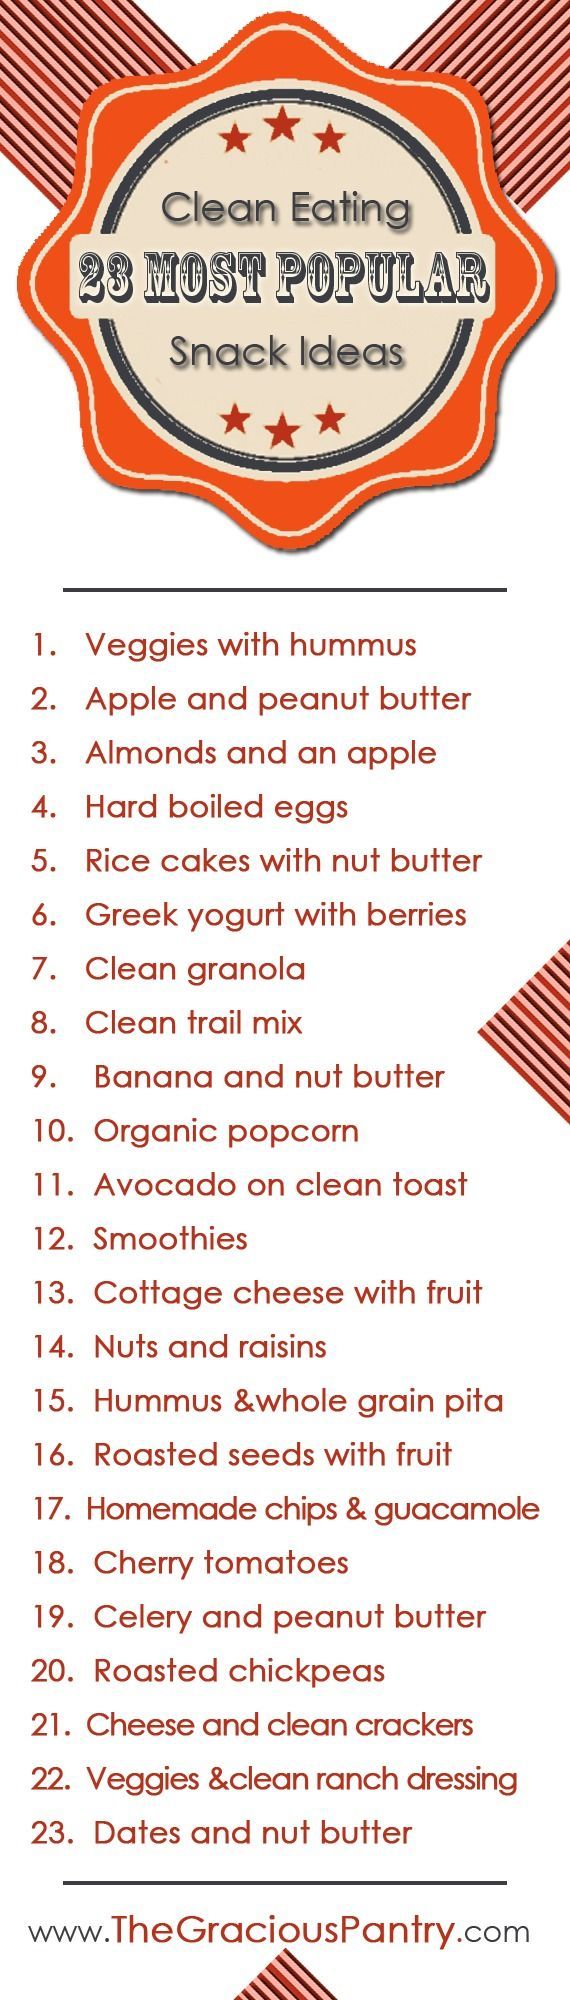 Here are some great snack options that you can add to your kids or your lunch box! #cleaneating #lunchbox